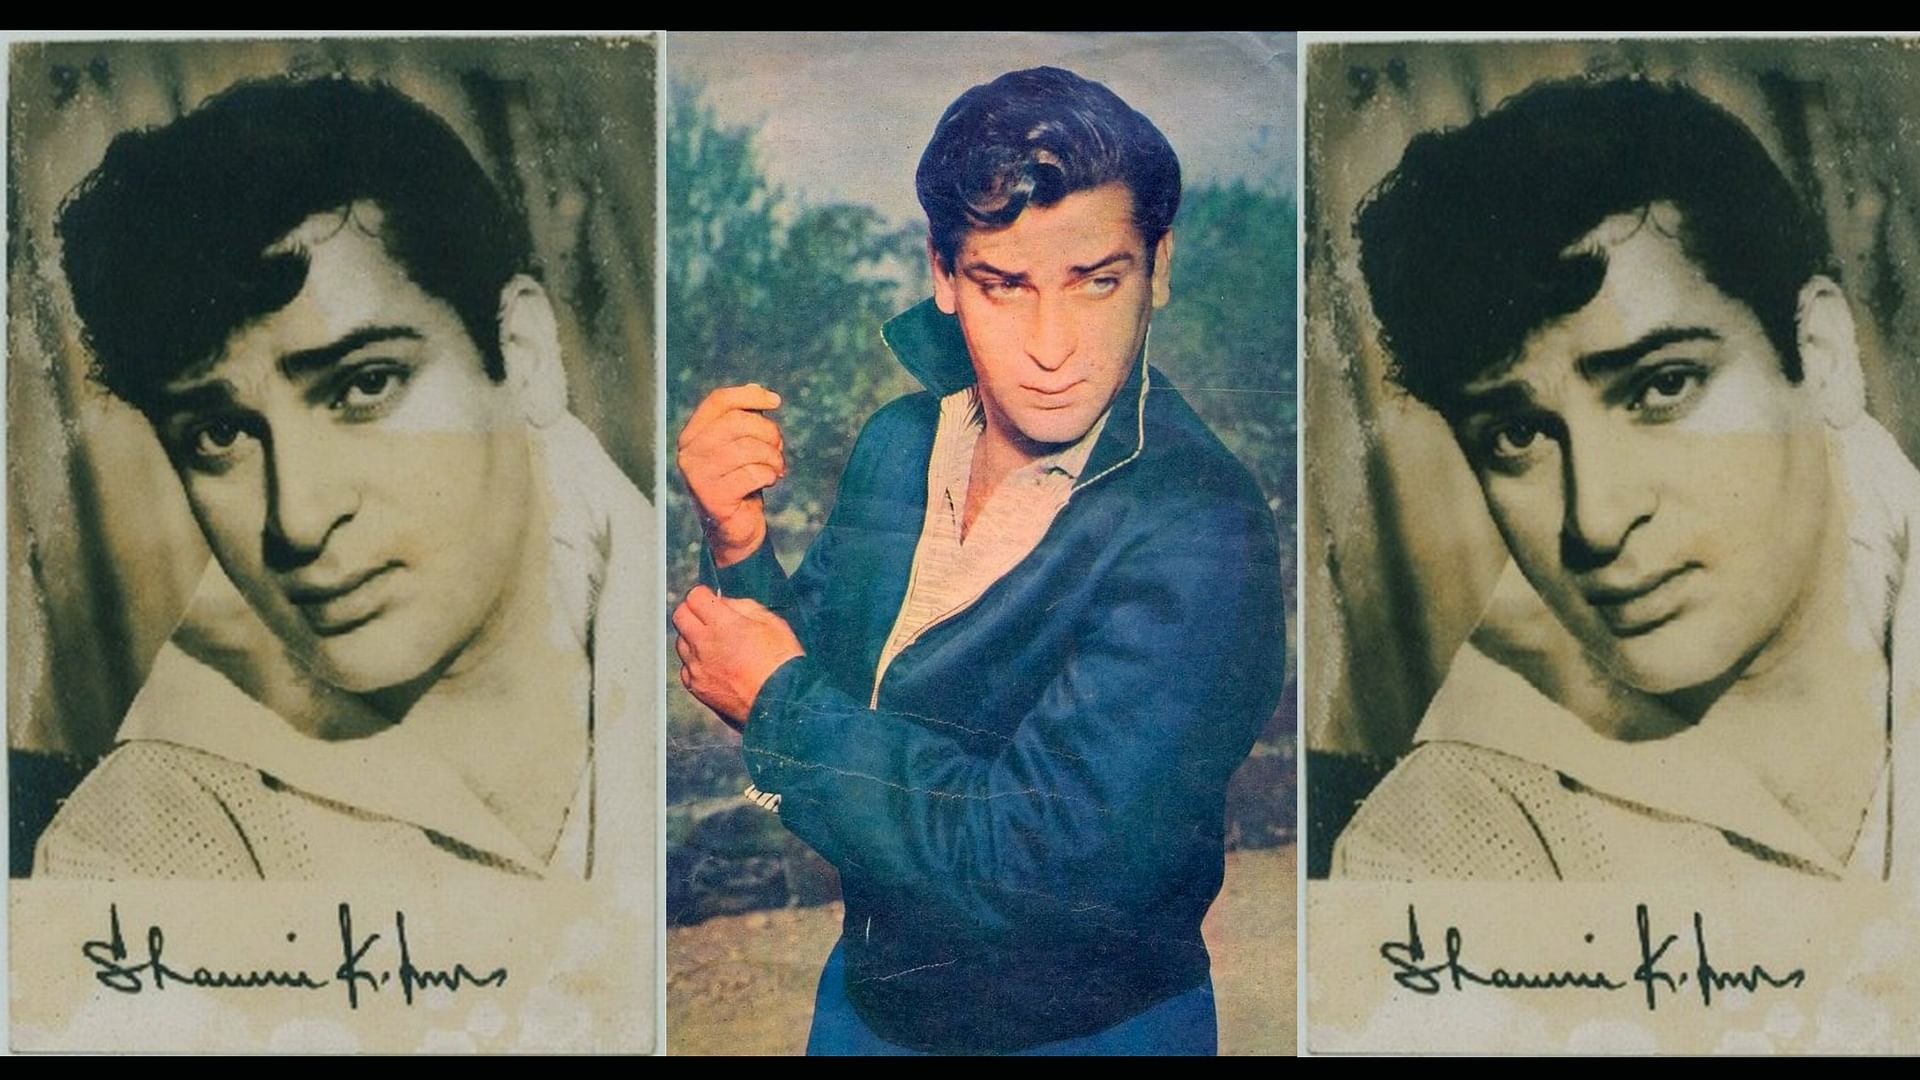 Shammi Kapoor: Bollywood’s first the rebel lover boy.